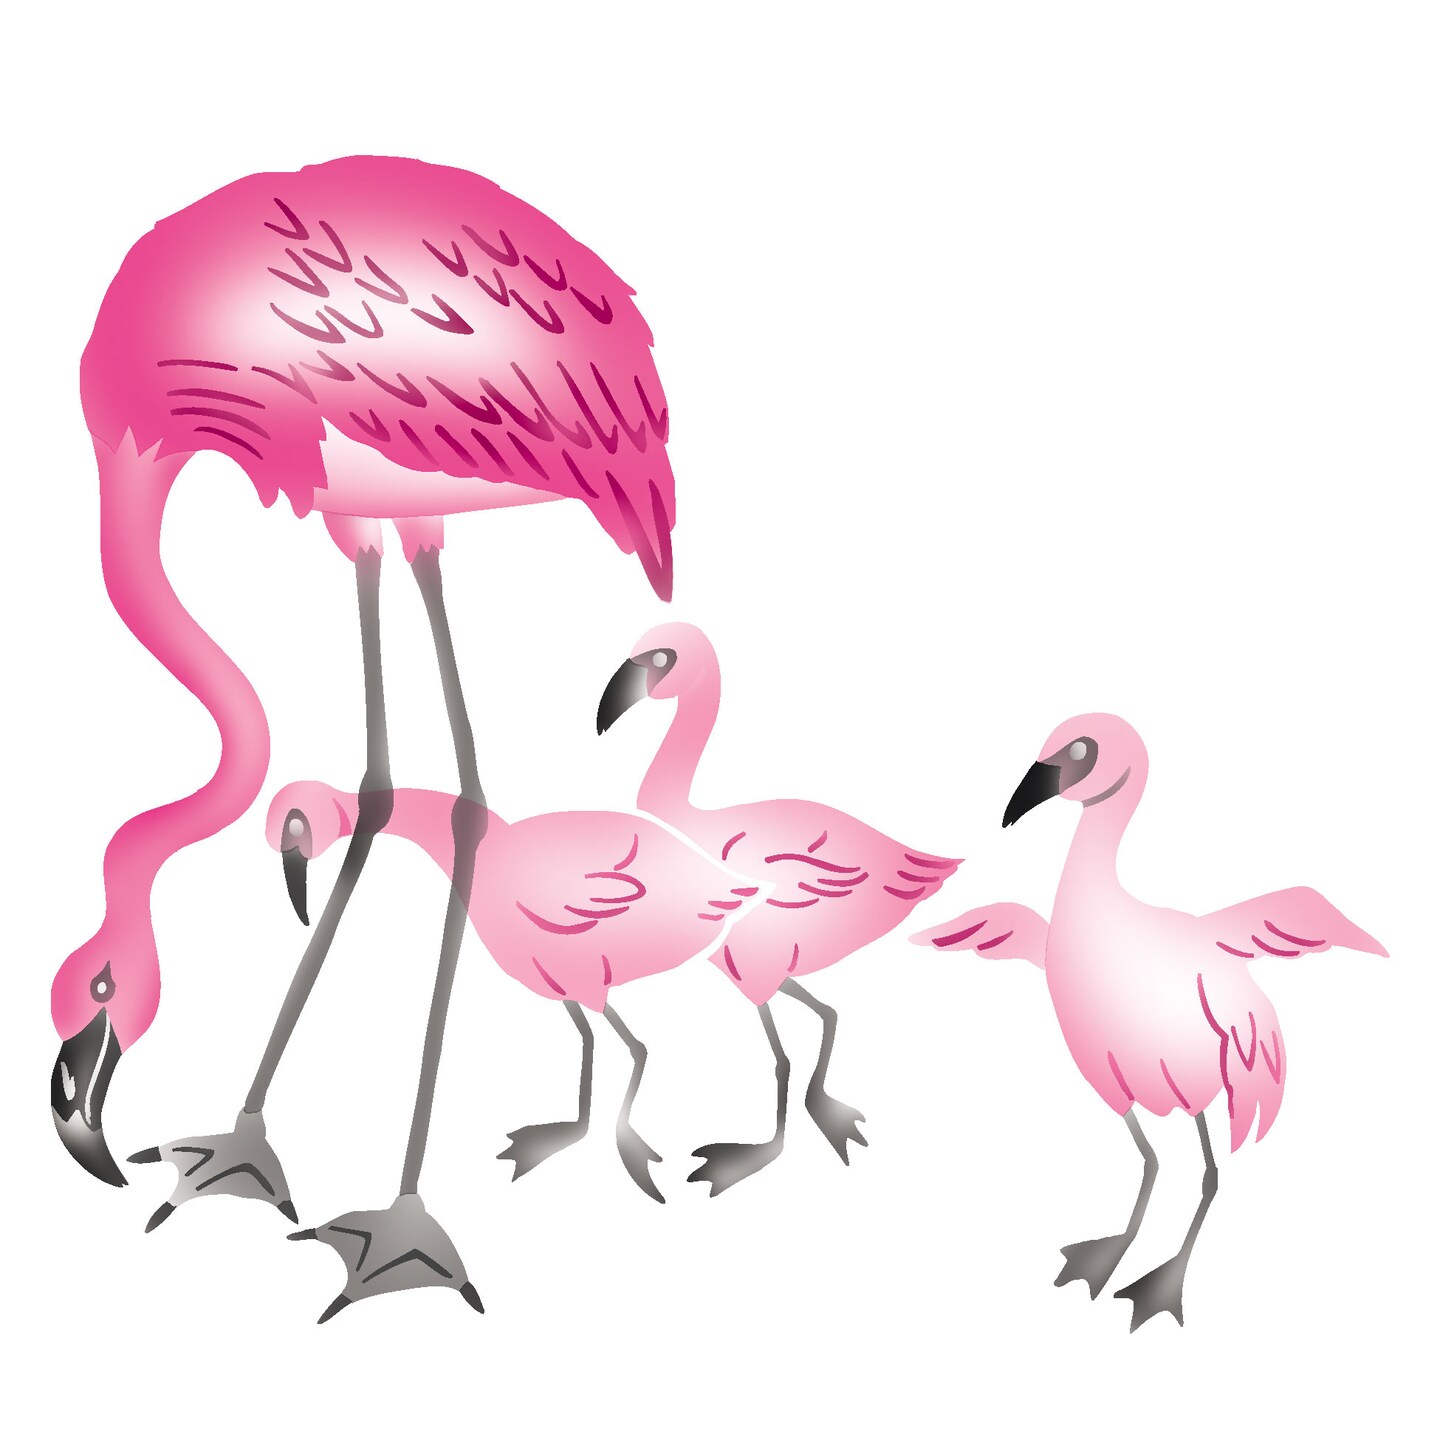 Flamingo Family Wall Stencil | 2721 by Designer Stencils | Animal &#x26; Nature Stencils | Reusable Art Craft Stencils for Painting on Walls, Canvas, Wood | Reusable Plastic Paint Stencil for Home Makeover | Easy to Use &#x26; Clean Art Stencil